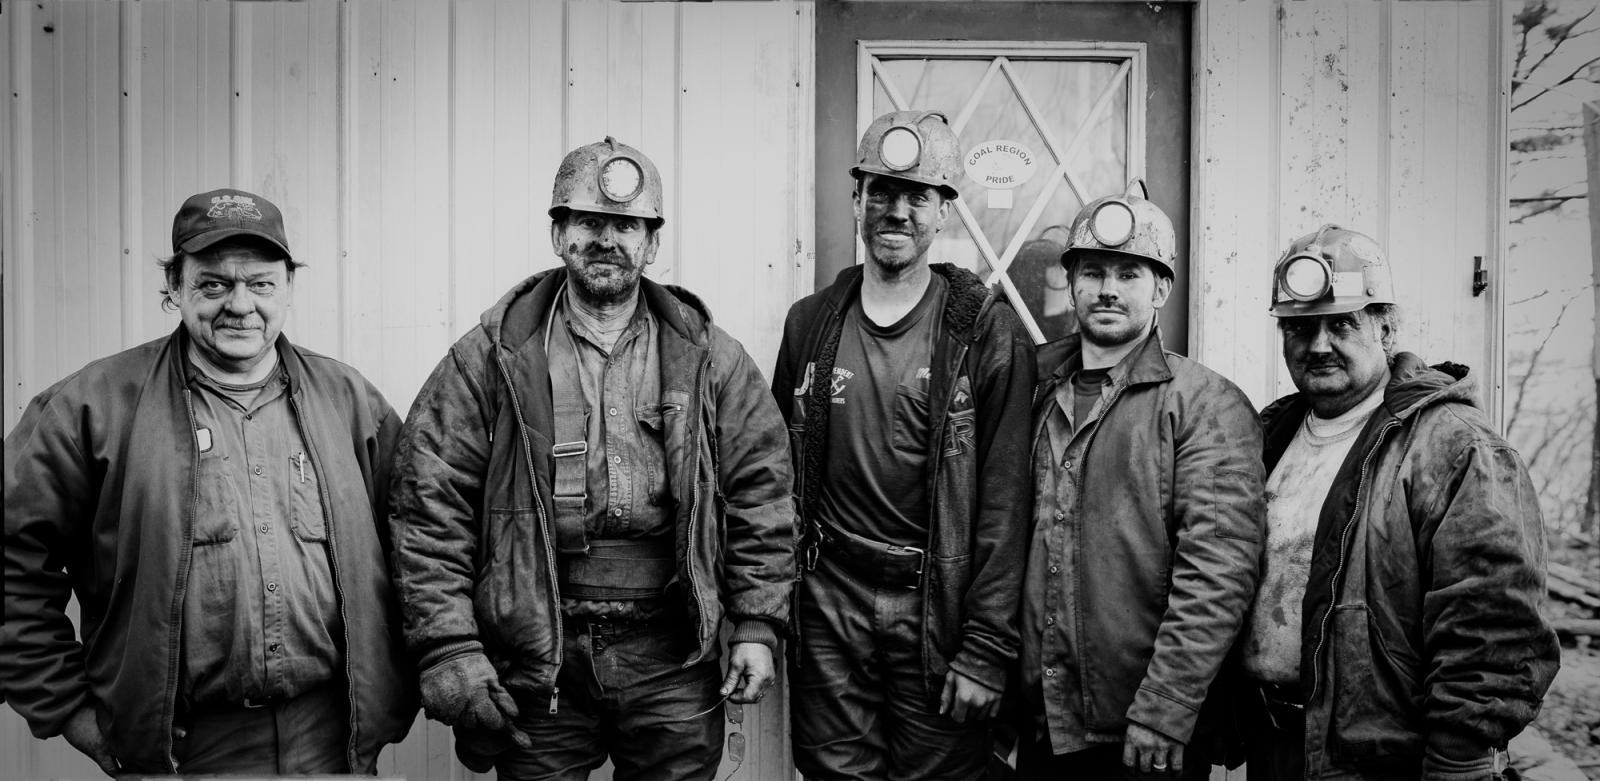 Image from The Portraits -   S&M Mine crew  